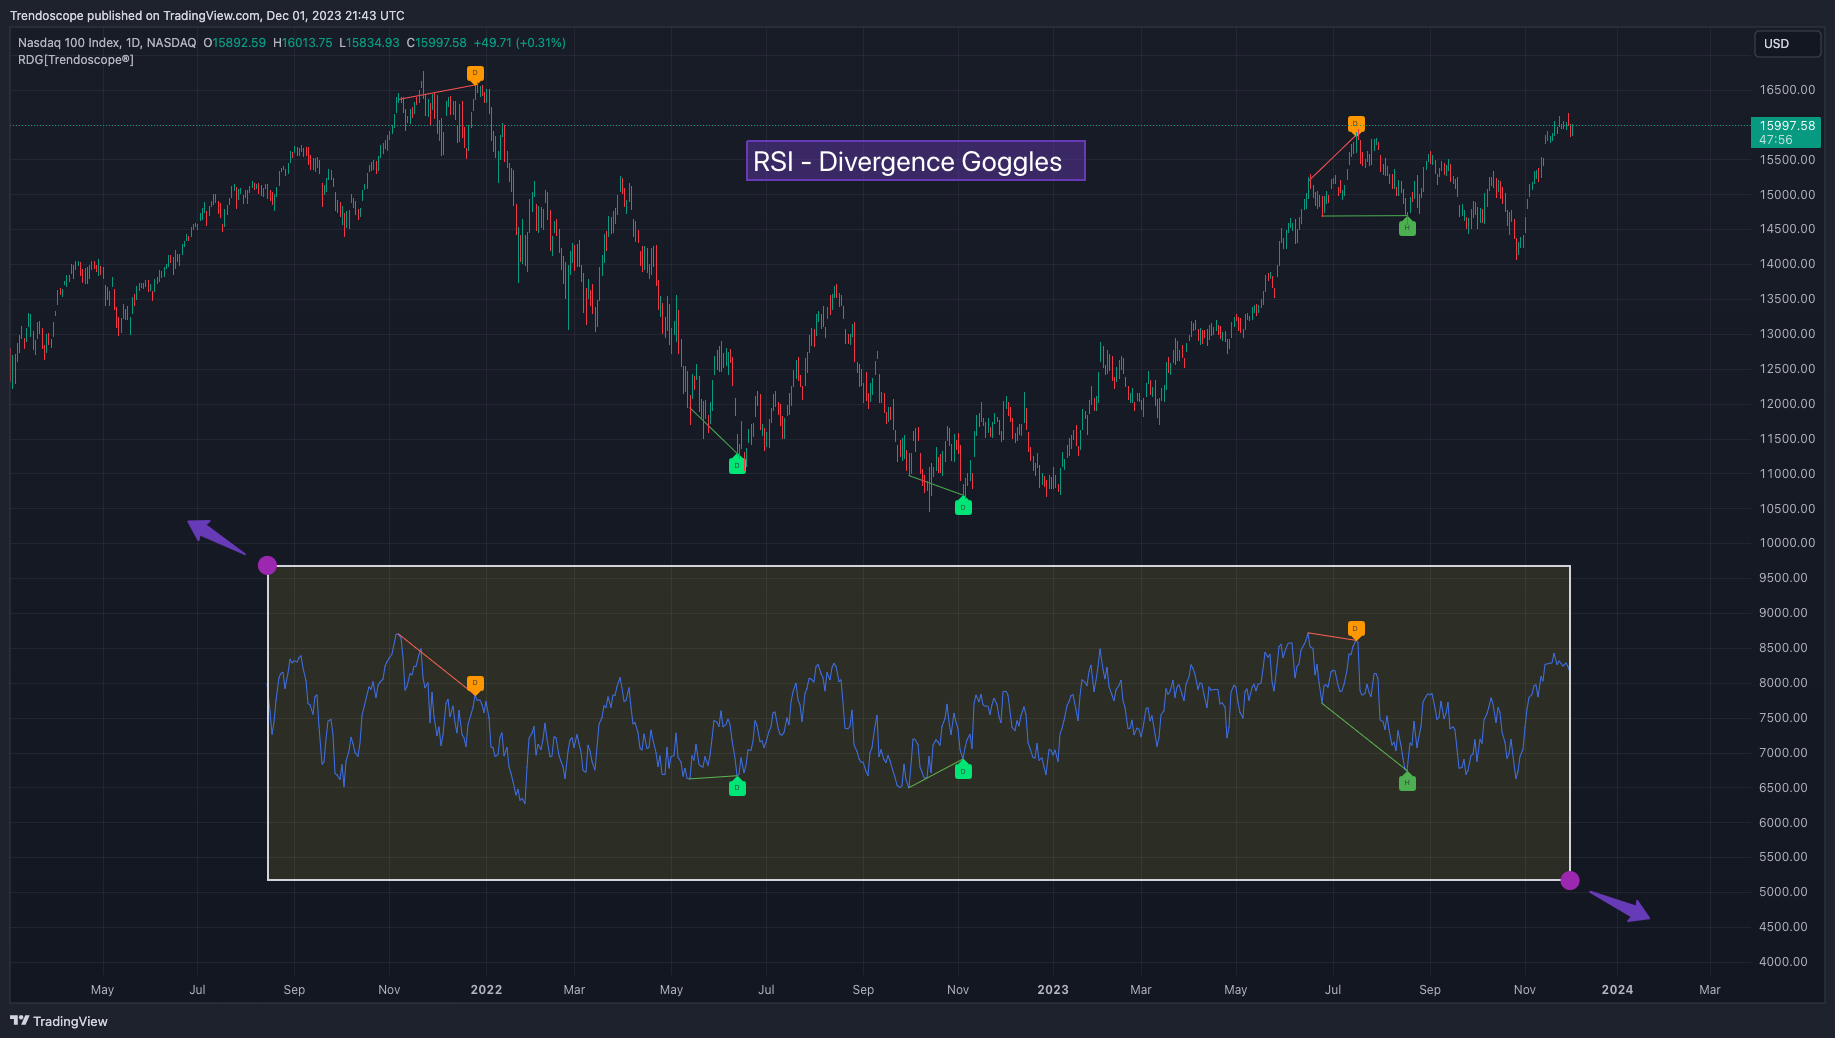 RSI Divergence Goggles